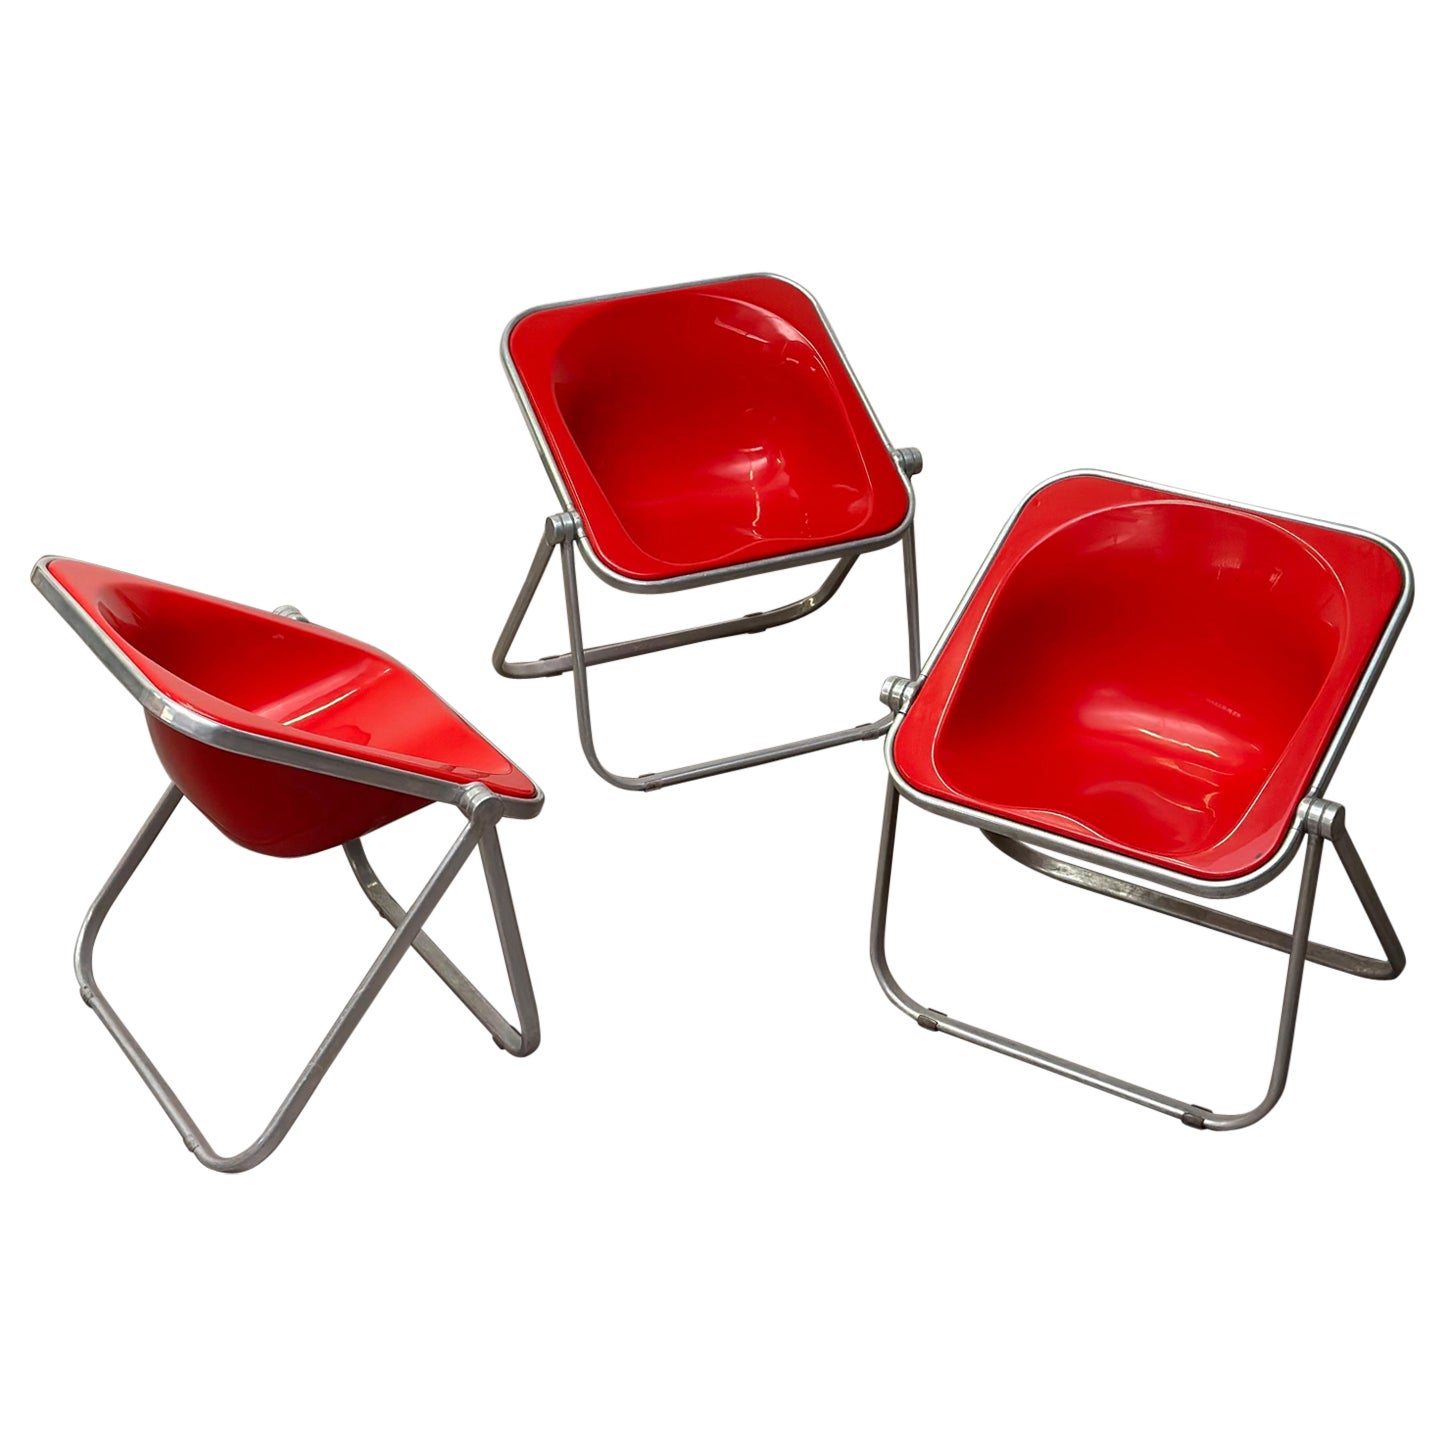  "Plona" Red Armchairs by Giancarlo Piretti for A. Castelli, 1969, set of two